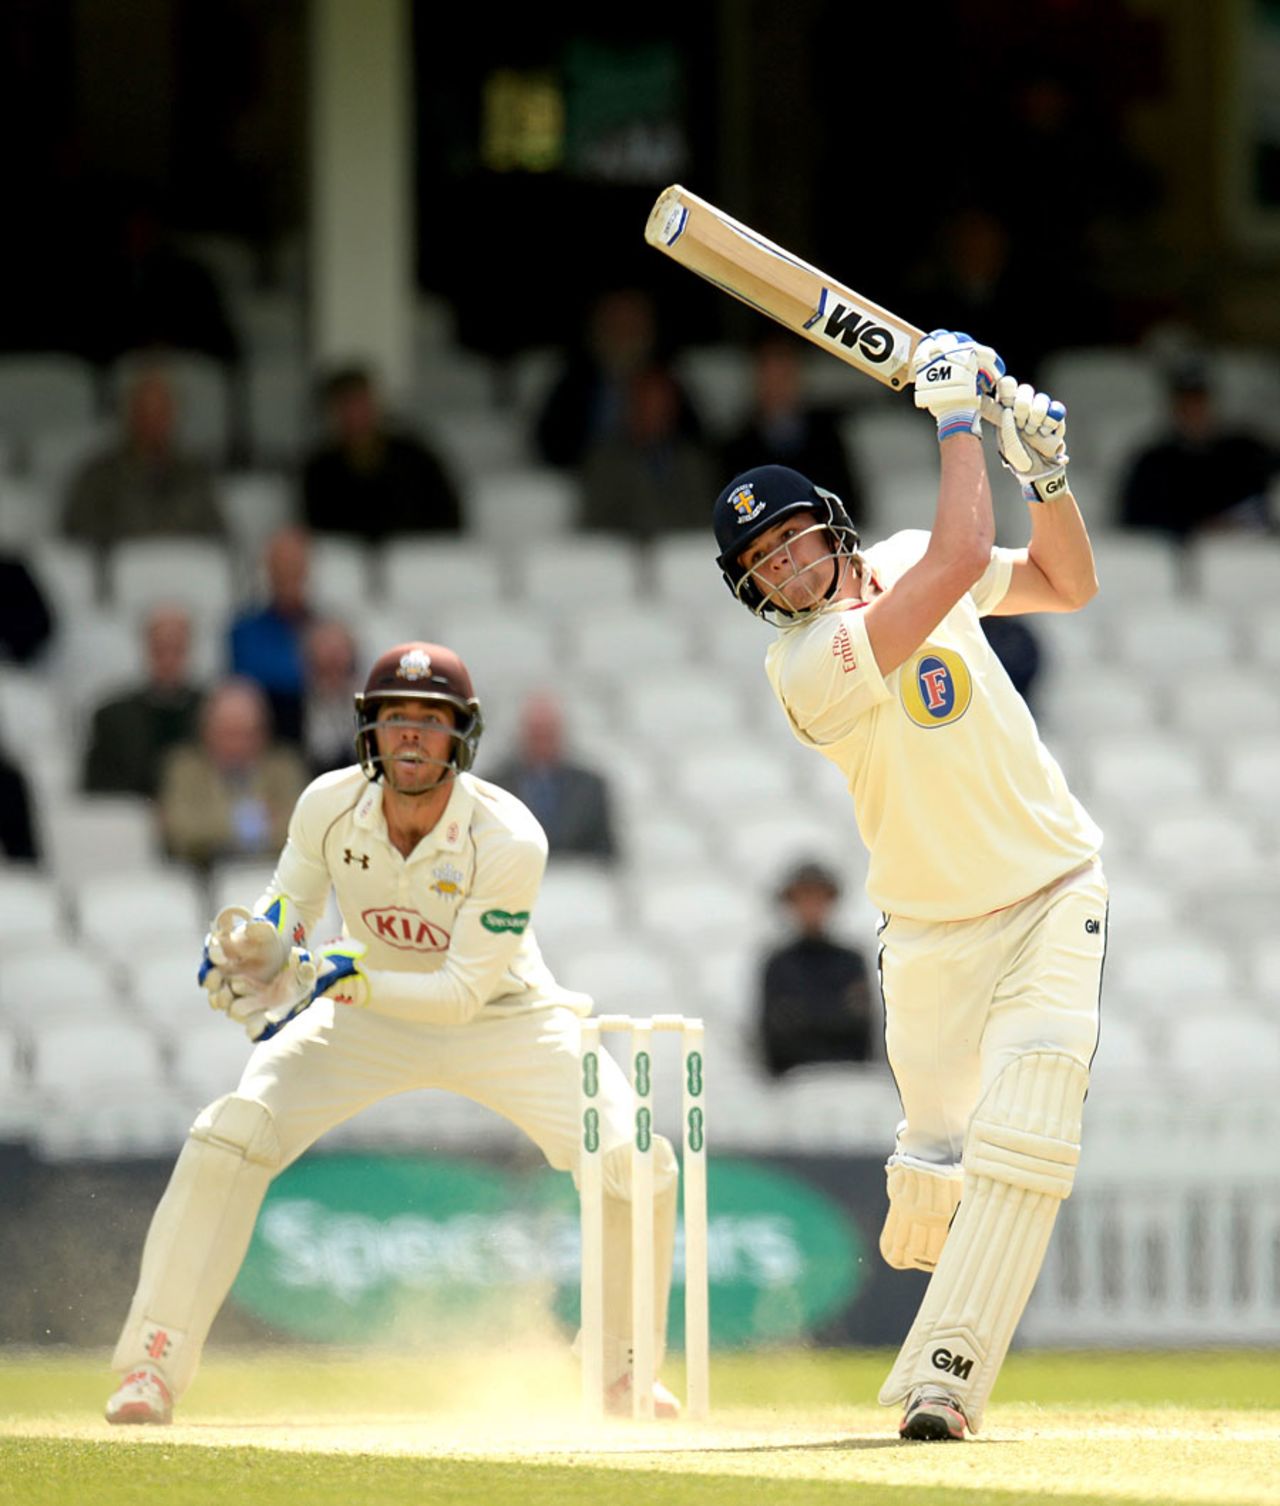 Jack Burnham goes over the top, Surrey v Durham, County Championship, Division One, The Oval, 3rd day, May 3, 2016